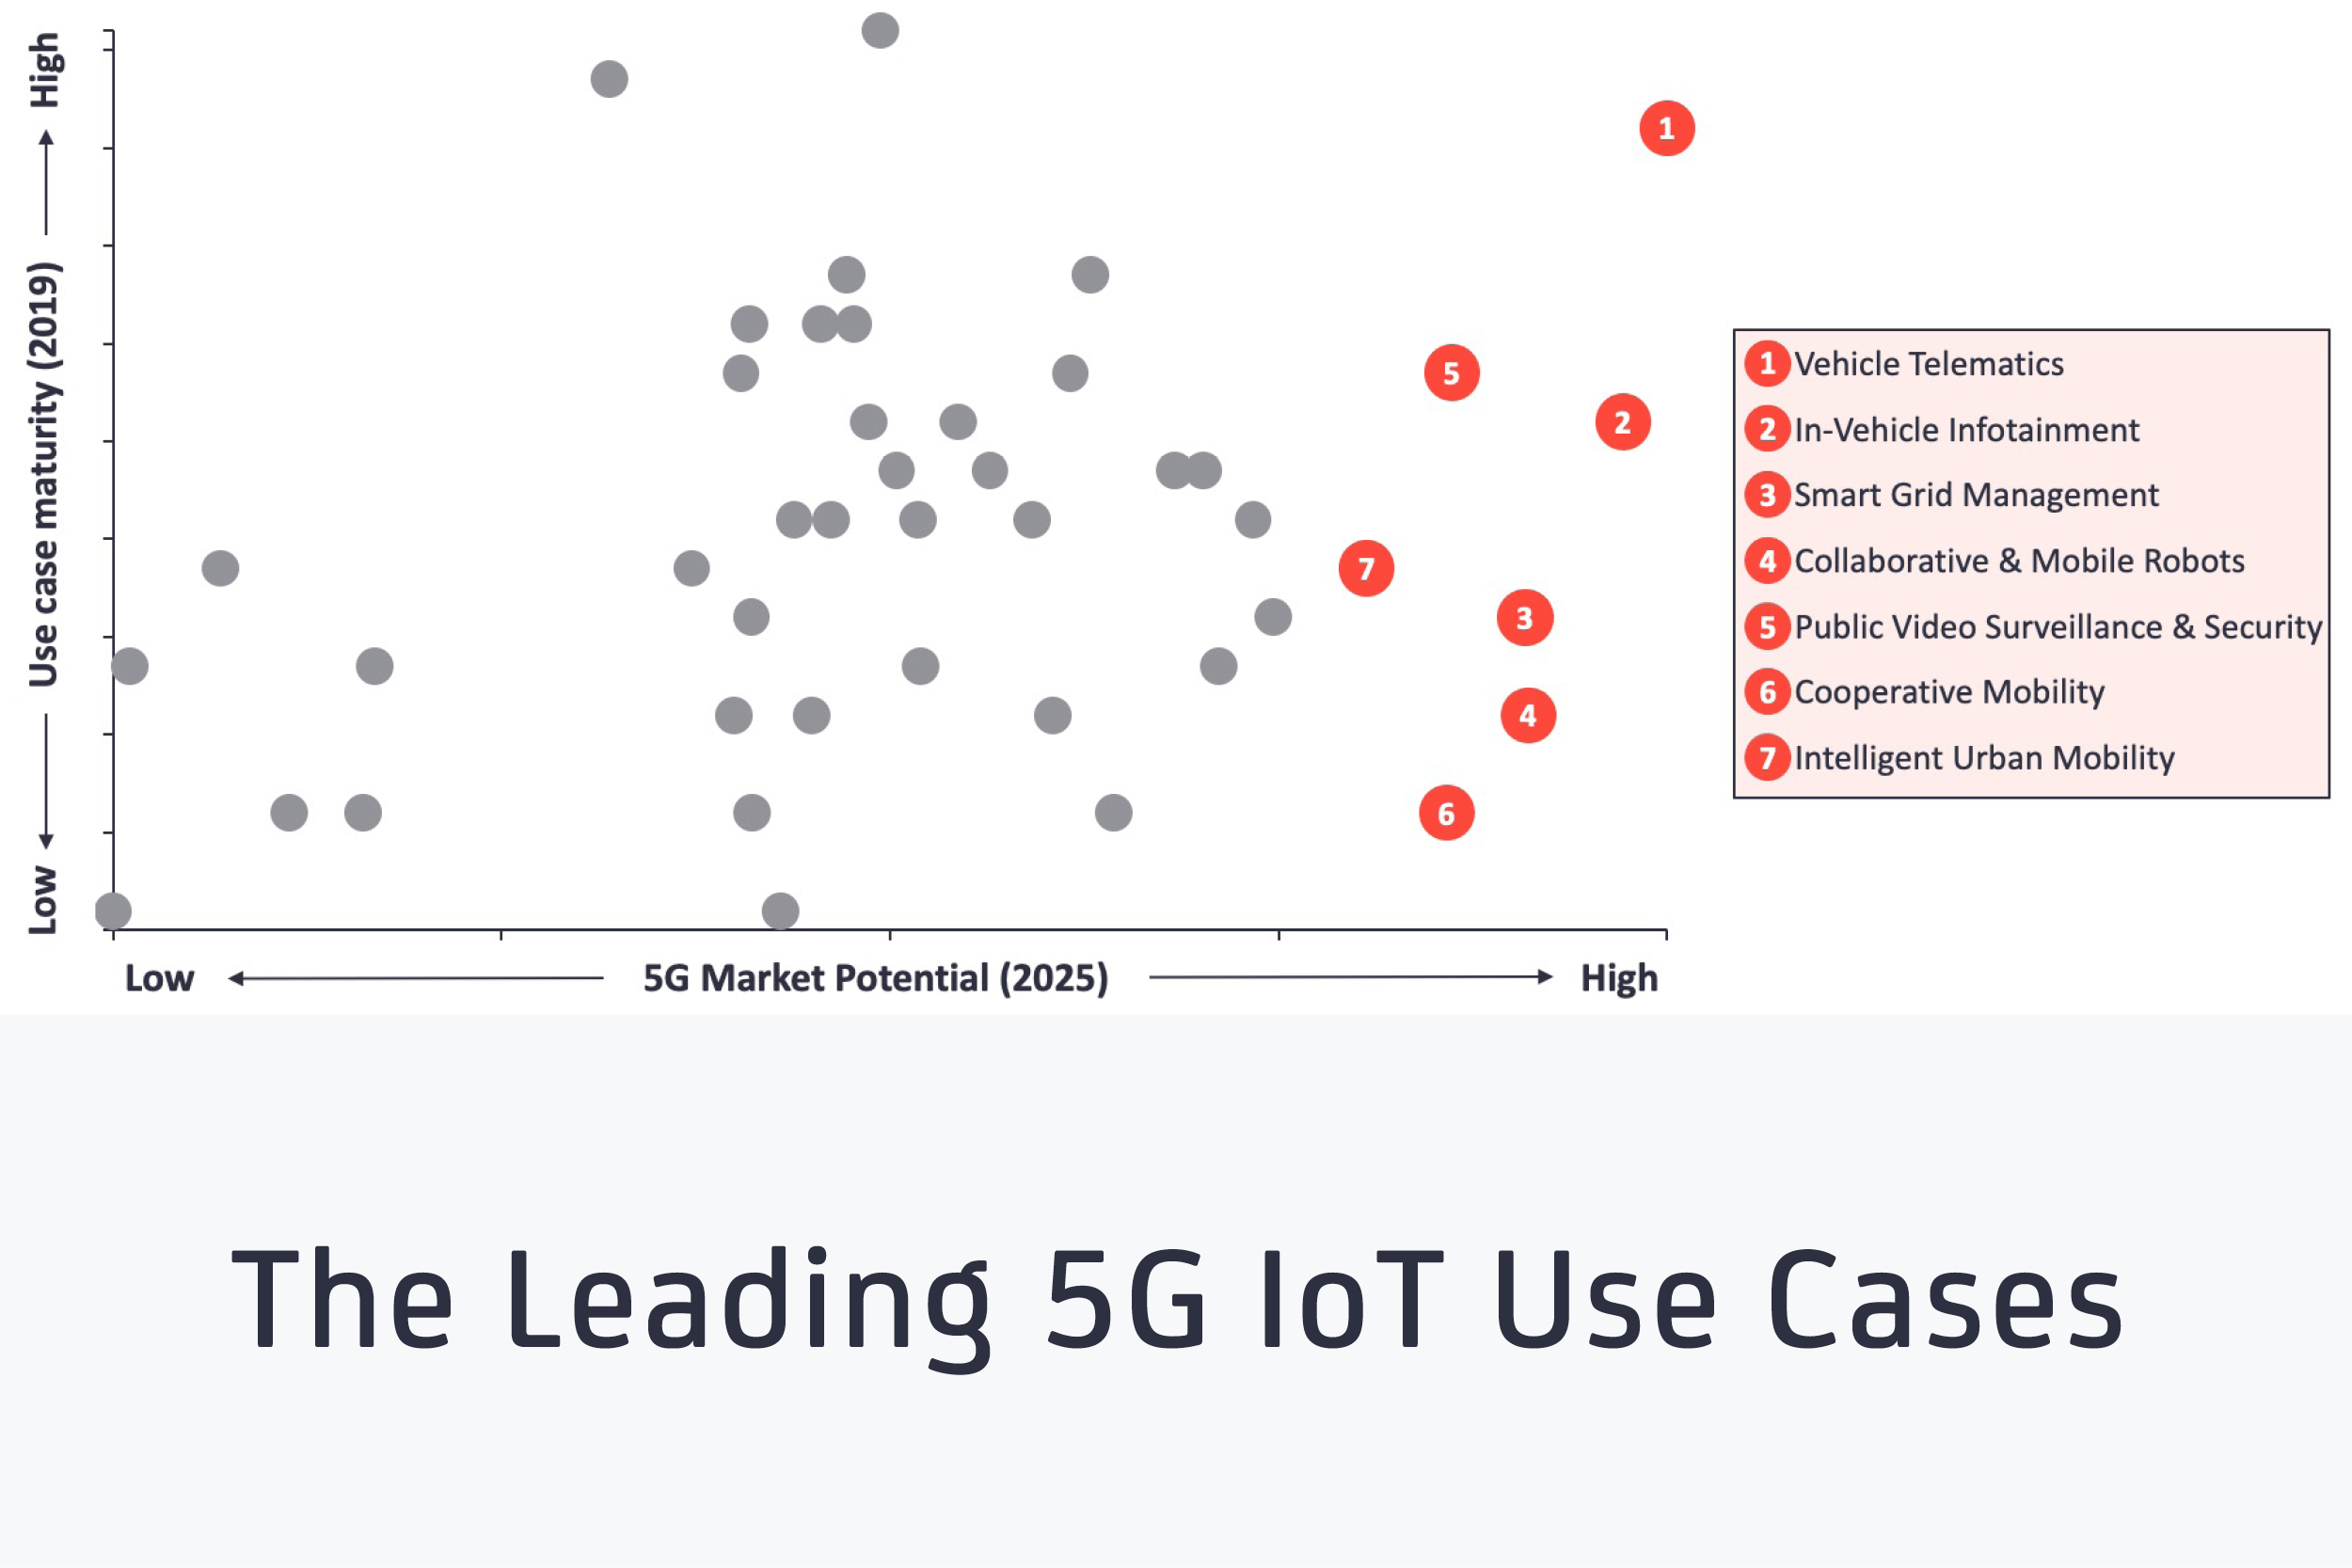 The Leading 5G IoT Use Cases